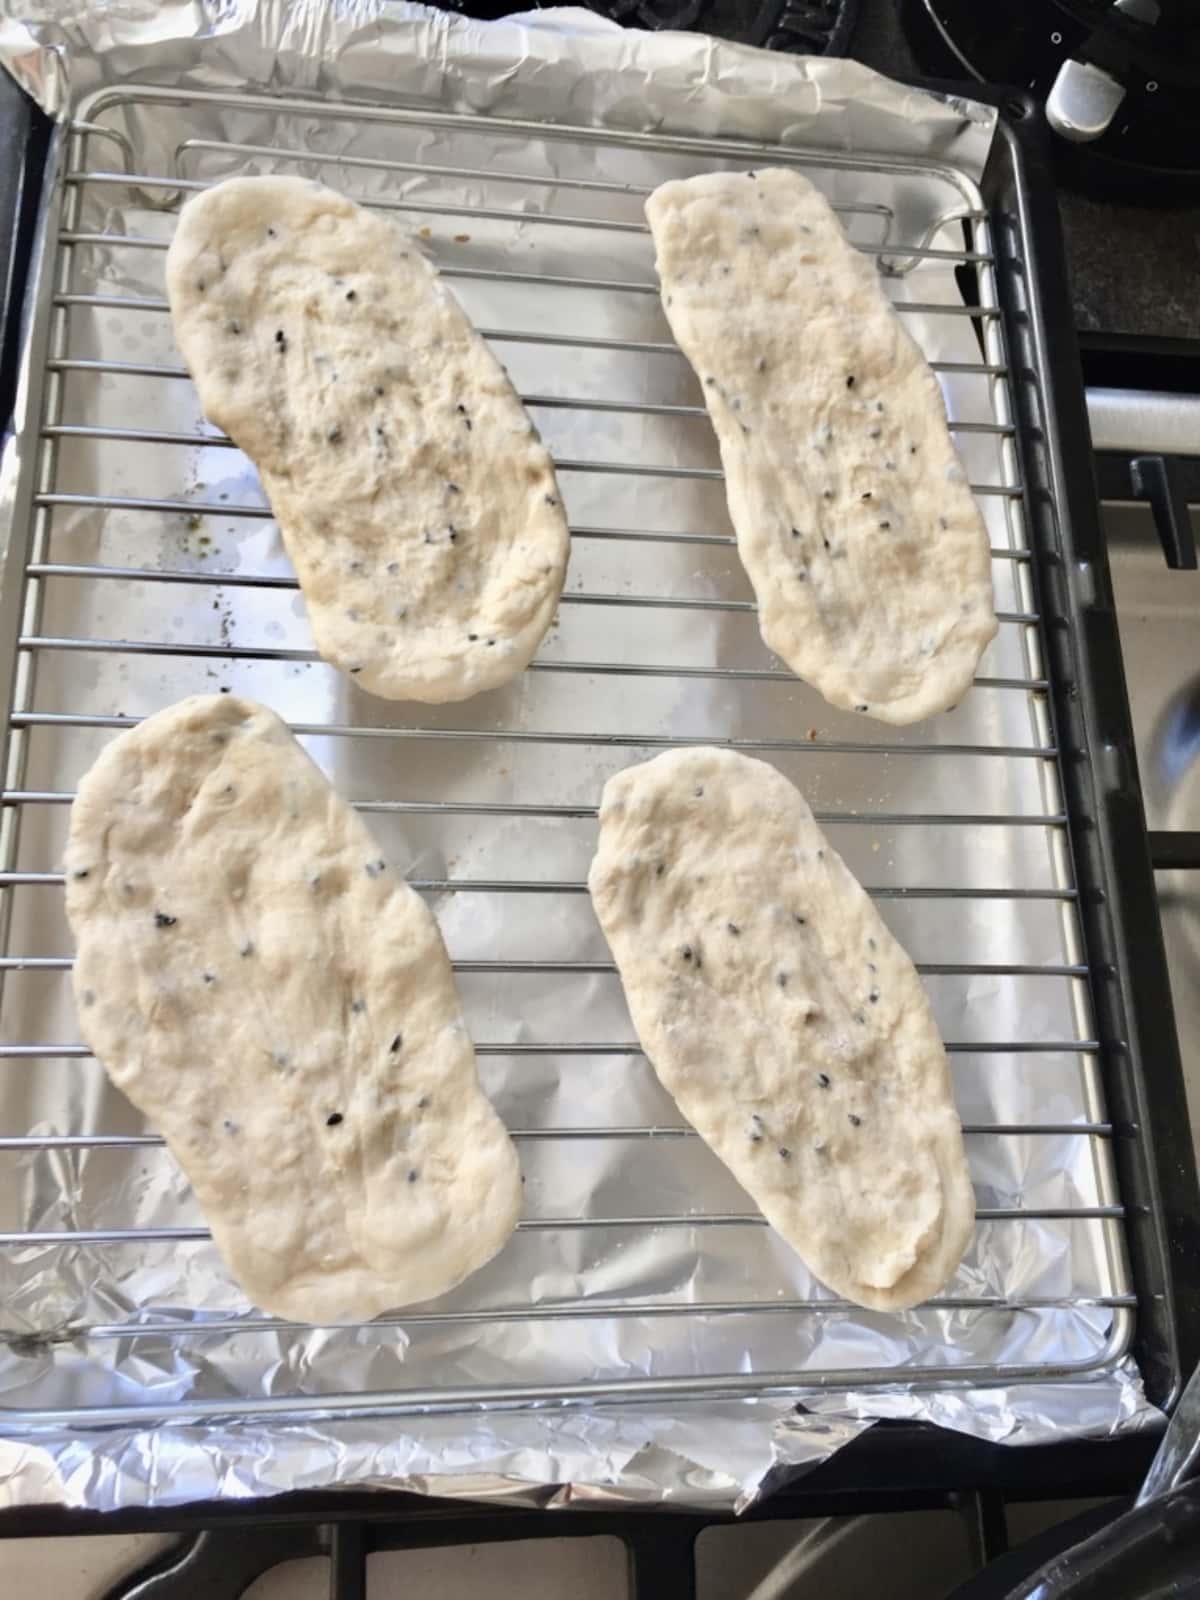 4 uncooked naan breads on a grill rack.